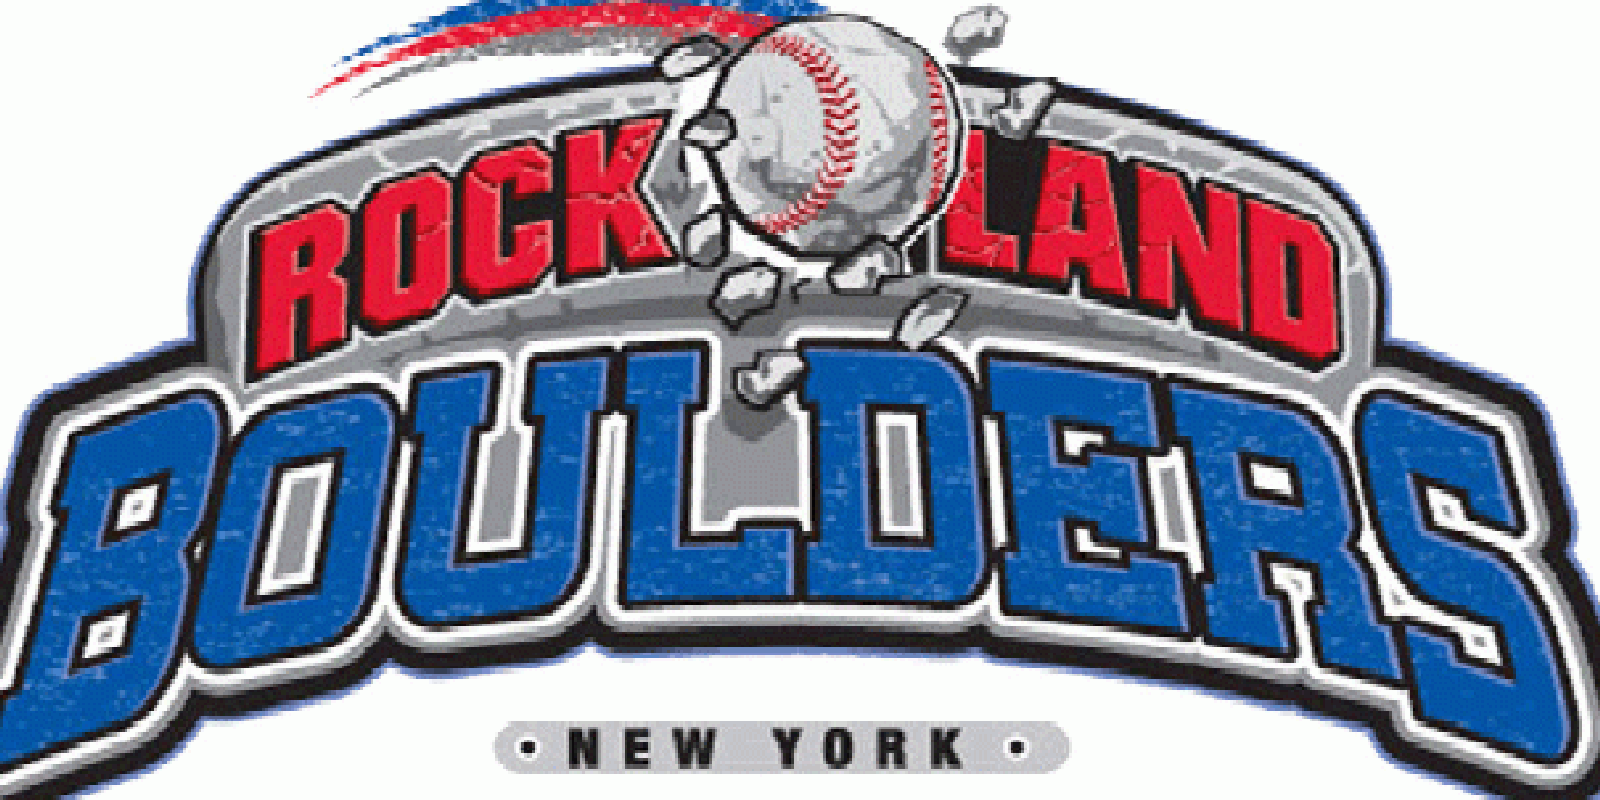 An Open Letter To The Rockland Boulders Baseball Team